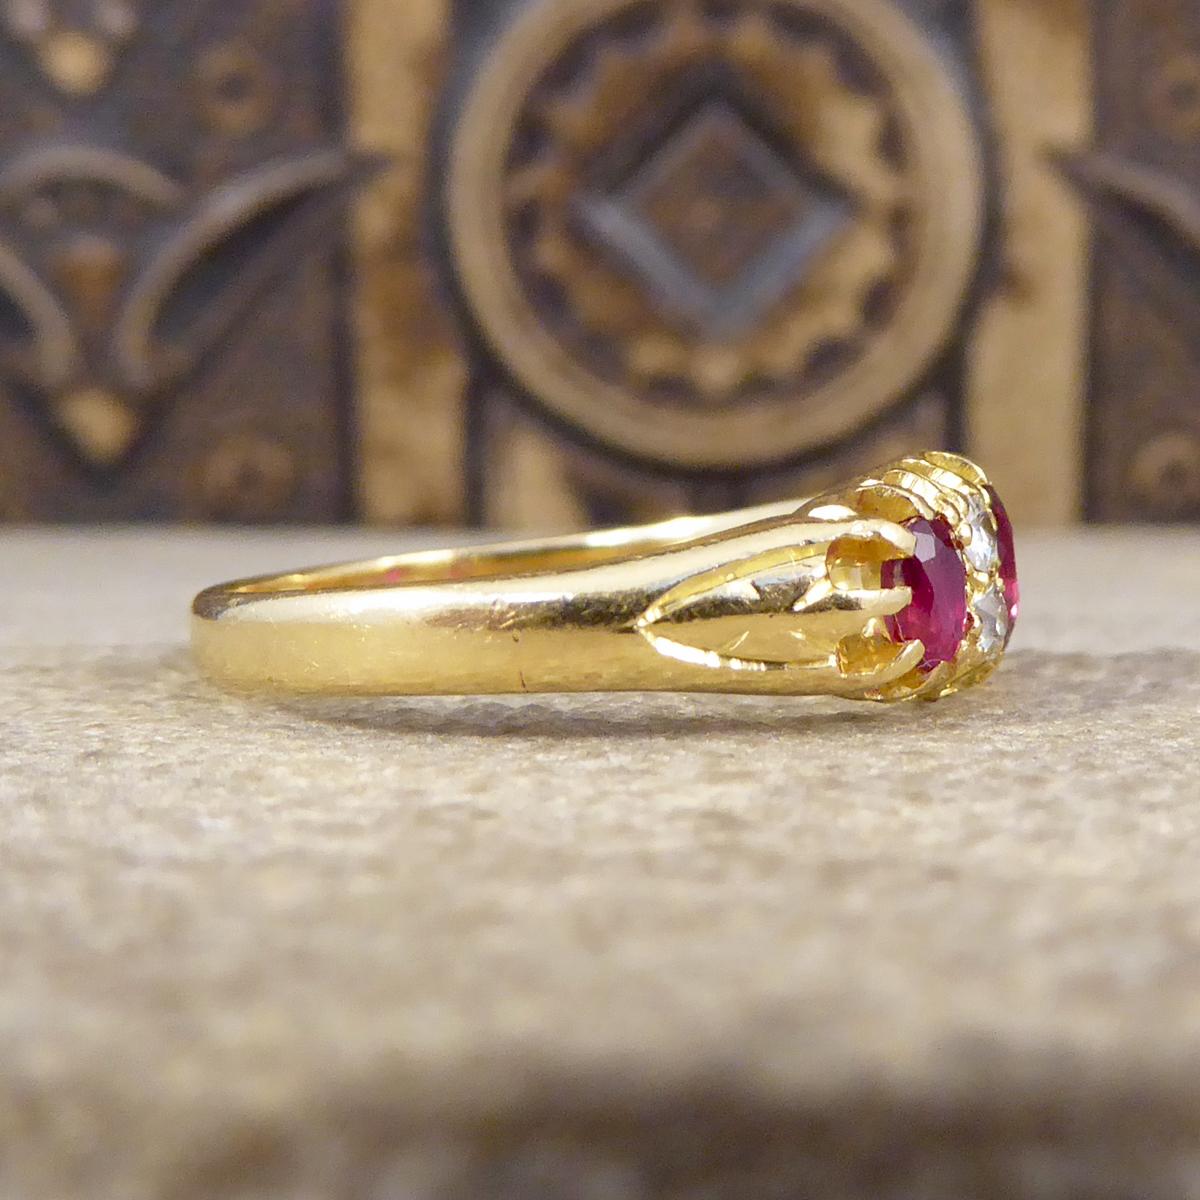 Round Cut Edwardian Vibrant Colored Ruby and Diamond Ring in 18 Carat Yellow Gold